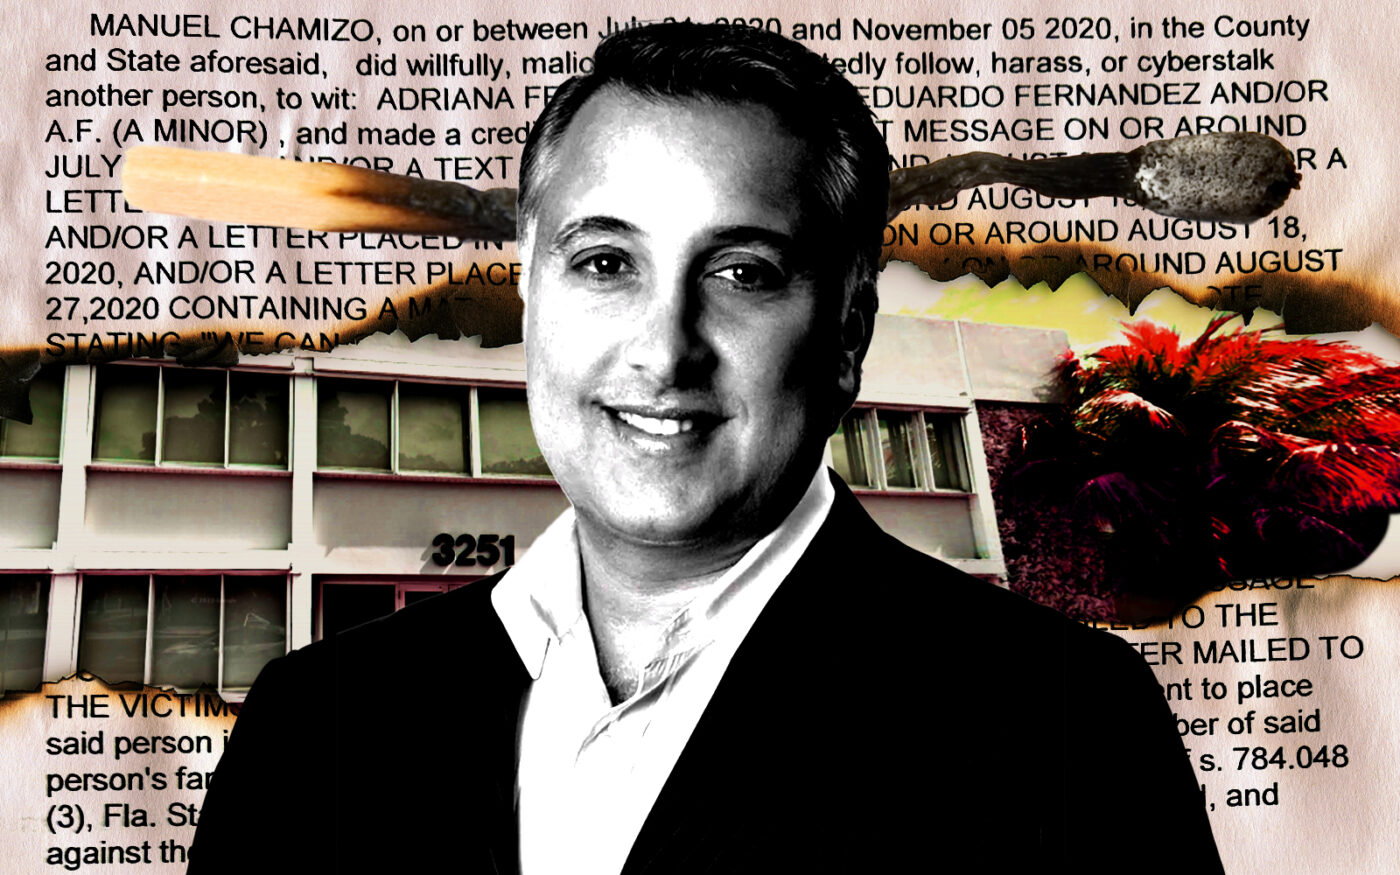 A photo illustration of One Sotheby’s International Realty's Manny Chamizo and the property at 3251 Ponce de Leon Boulevard in Coral Gables (Getty, Sotheby's International Realty, Google Maps)